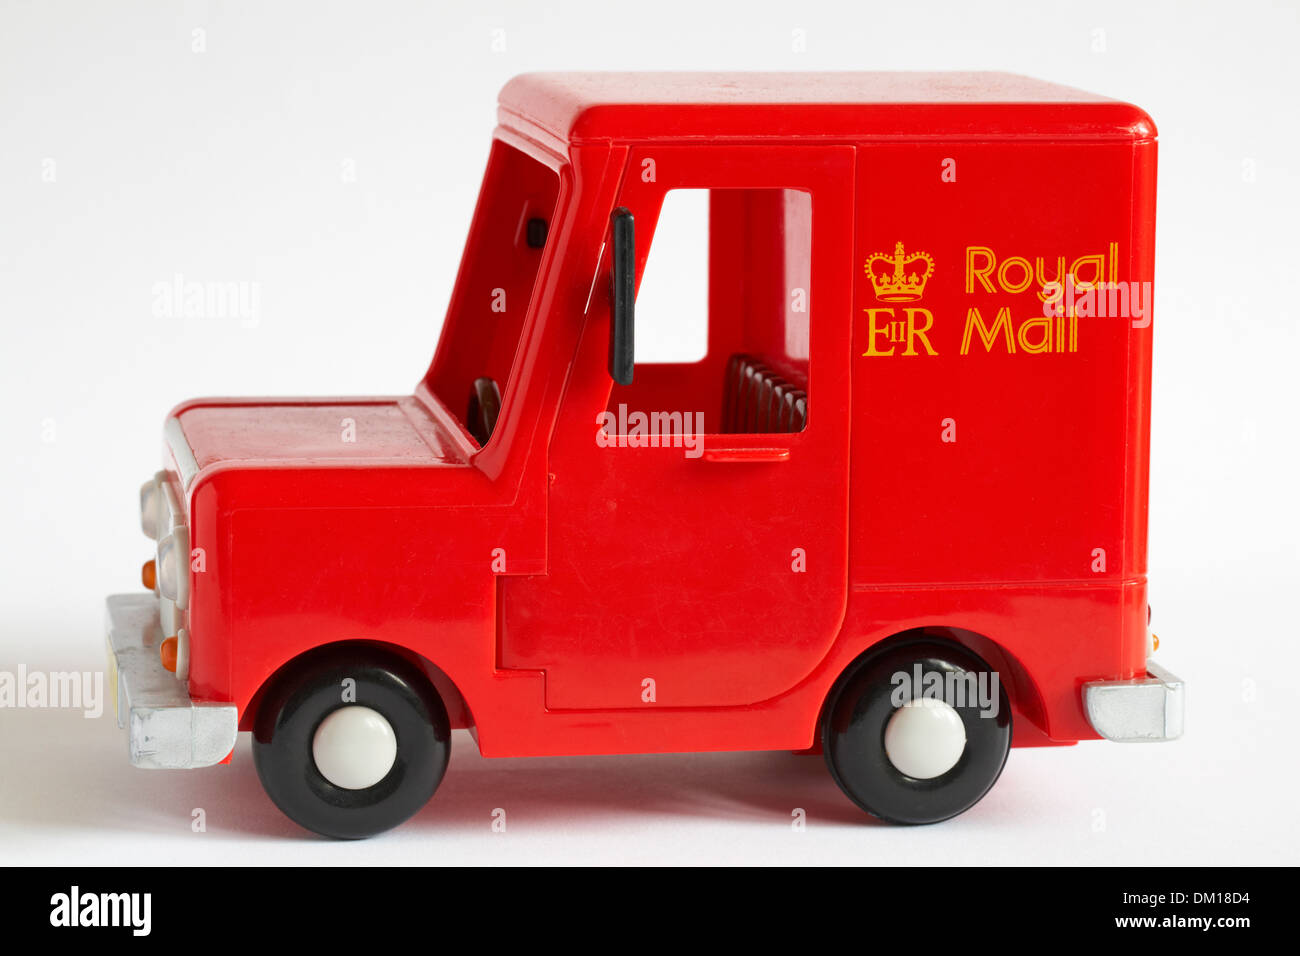 ER Royal Mail van plastic toy car isolated on white background Stock Photo